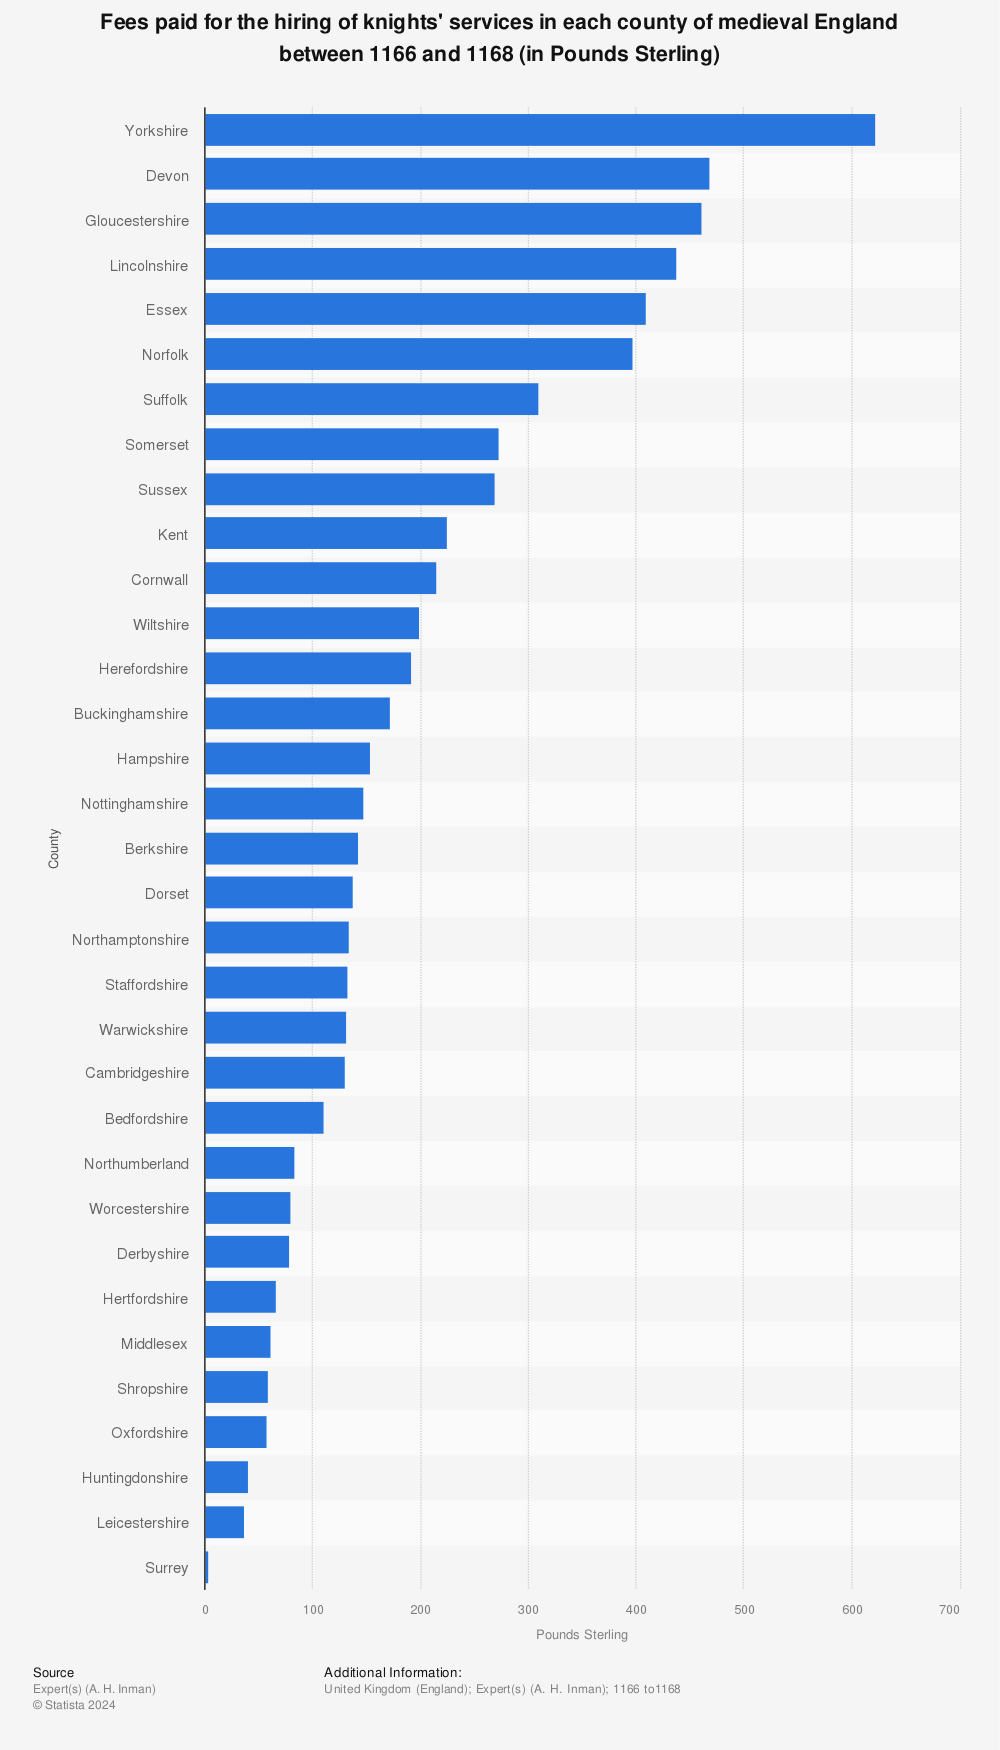 Statistic: Fees paid for the hiring of knights' services in each county of medieval England between 1166 and 1168 (in Pounds Sterling) | Statista